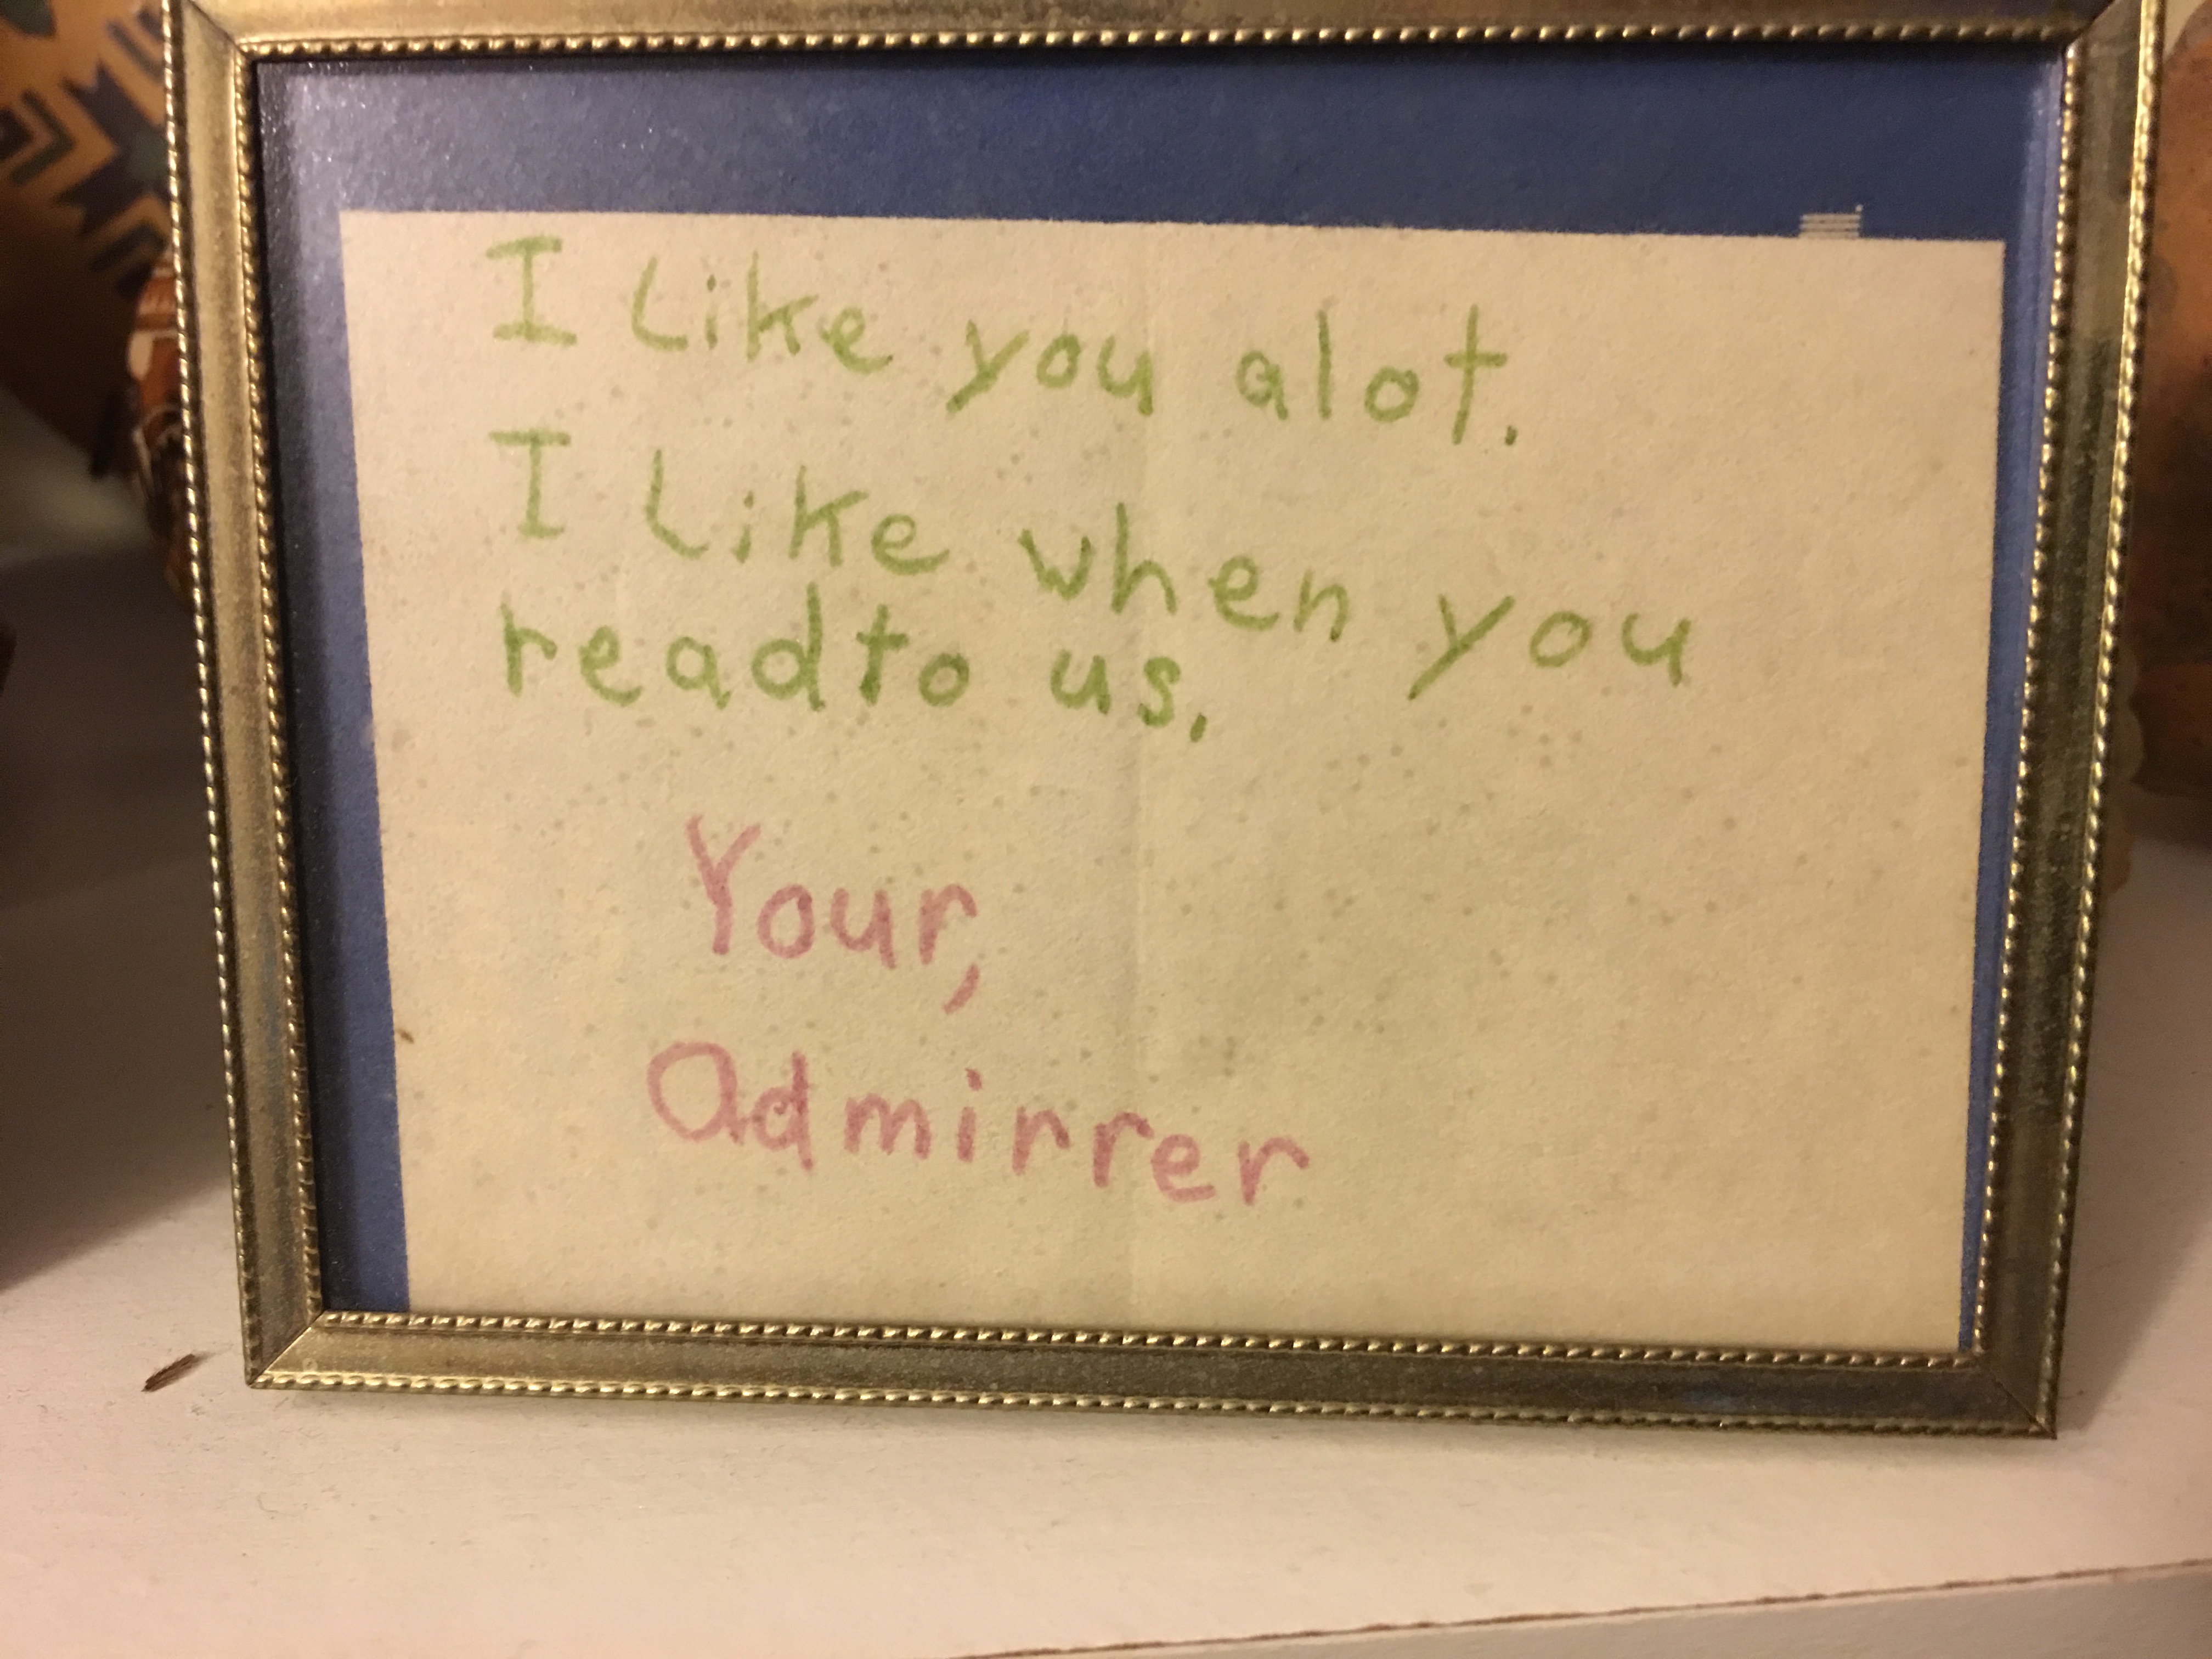 Framed note from a student, stating 'I like you alot. I like when you read to us.'.